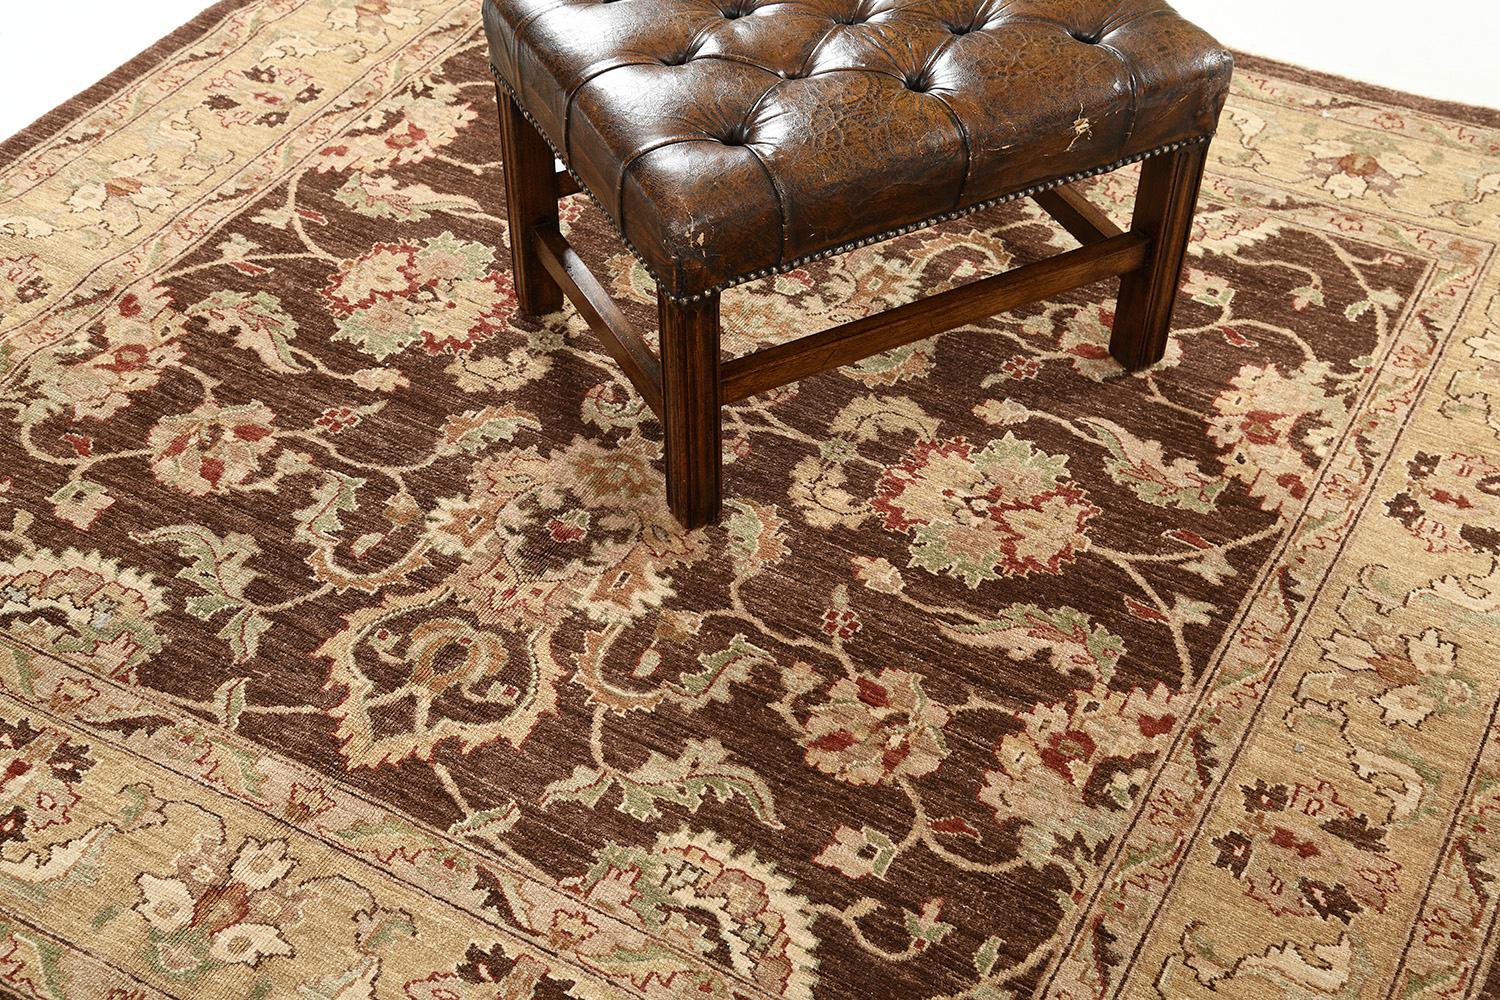 This enchanting Sultanabad Rug has symmetrical patterns that make the rug unique. A one of a kind rug that makes your interior more fascinating. Neutral tones feature even the smallest details of the patterns and motifs that match with the red